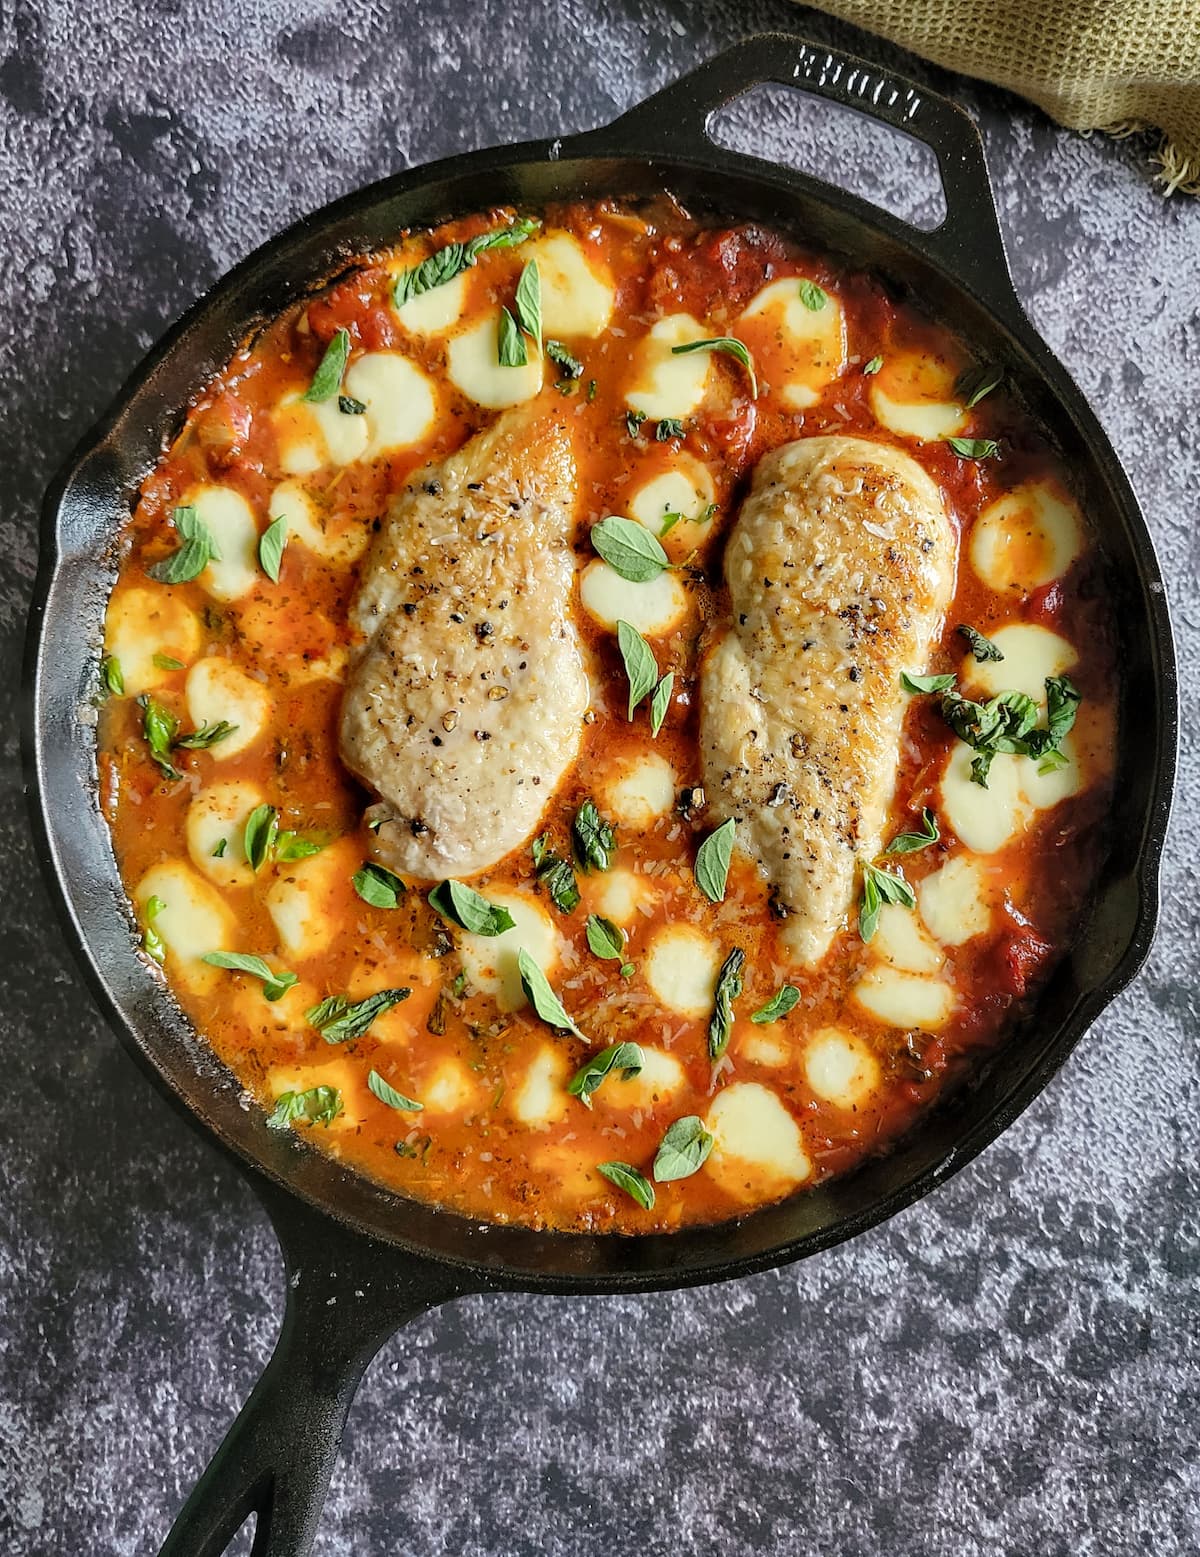 two cooked and seasoned chicken breasts in tomato sauce surrounded by melted mini bocconcini balls and garnished with fresh chopped basil in a cast iron skillet